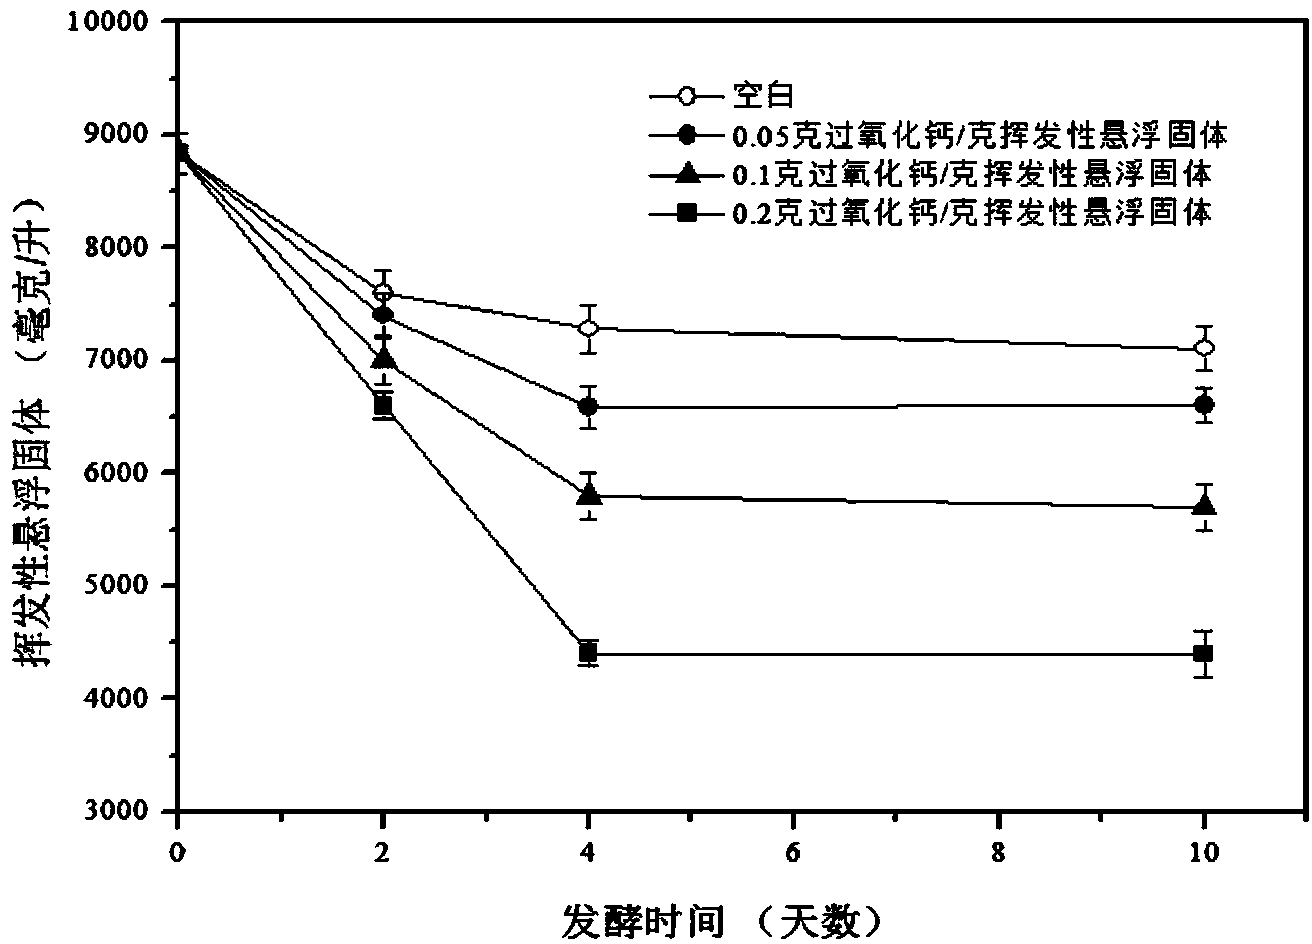 Method for improving acid production quality and acetic acid proportion in anaerobic fermentation of residue active sludge